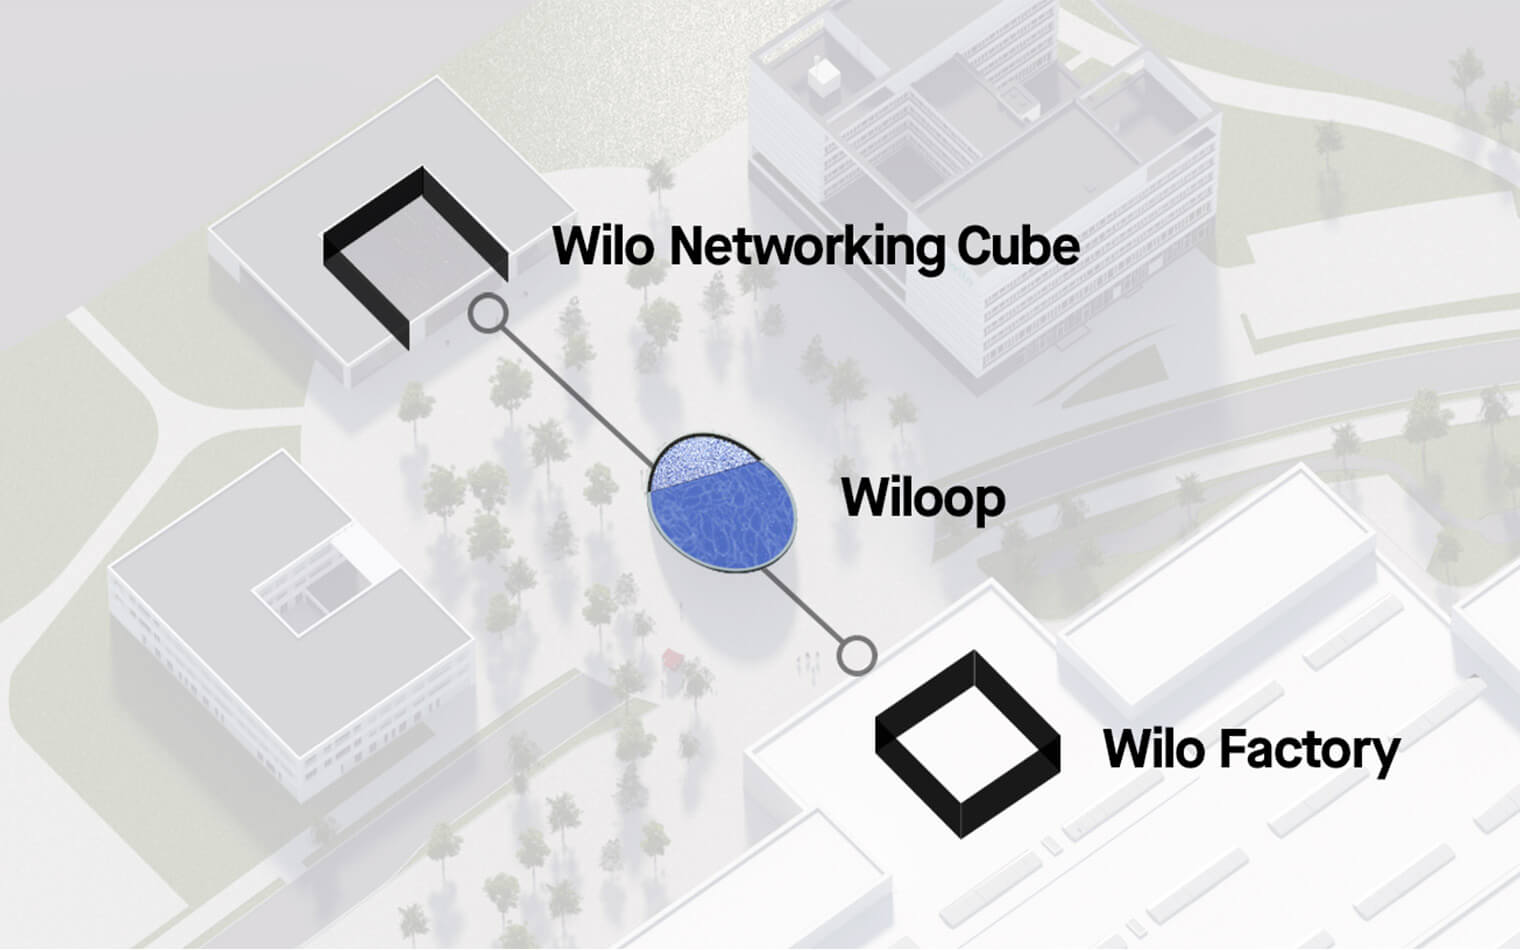 This picture shows the axis of content at the new Wilo headquarters. It summarises the content of the Wilo Networking Cube, Wilo Focus and Wilo Factory buildings.